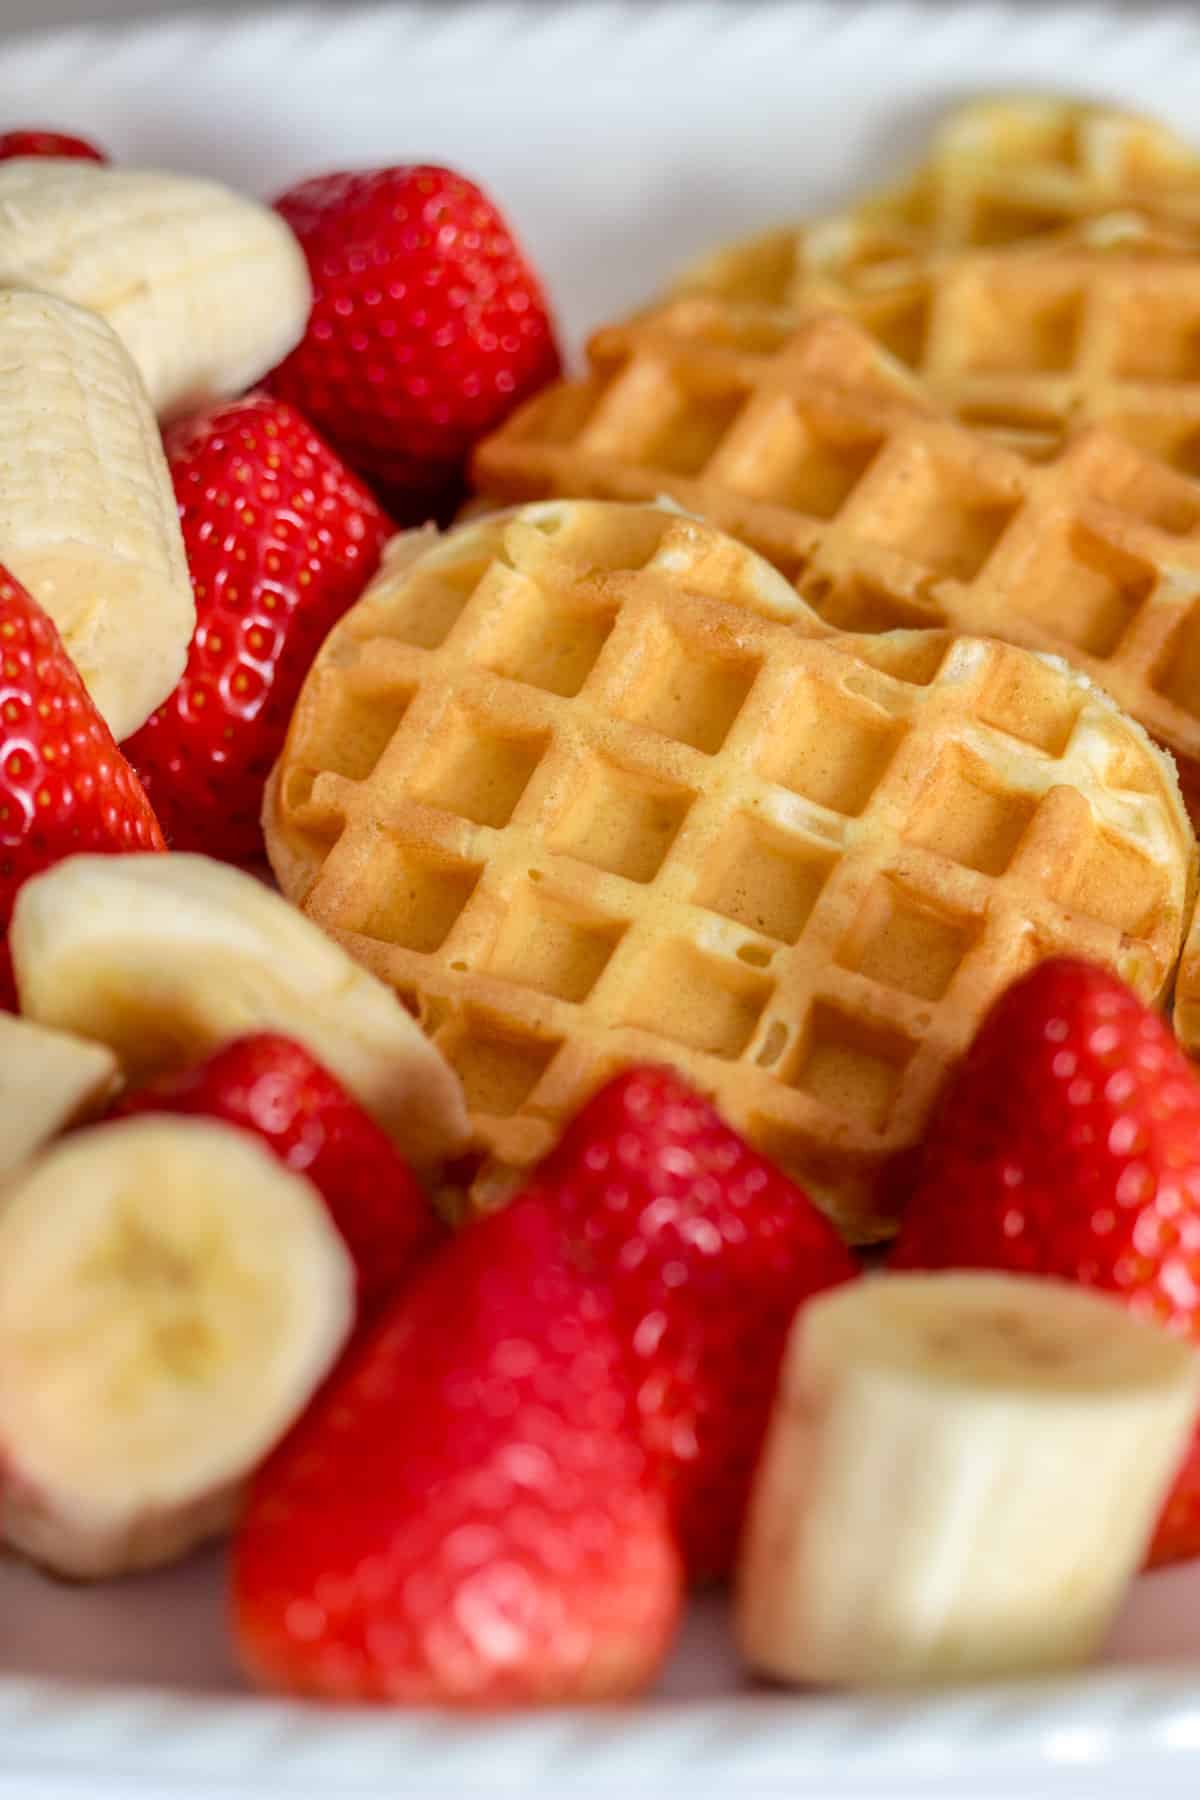 Heart shaped waffles and strawberries.